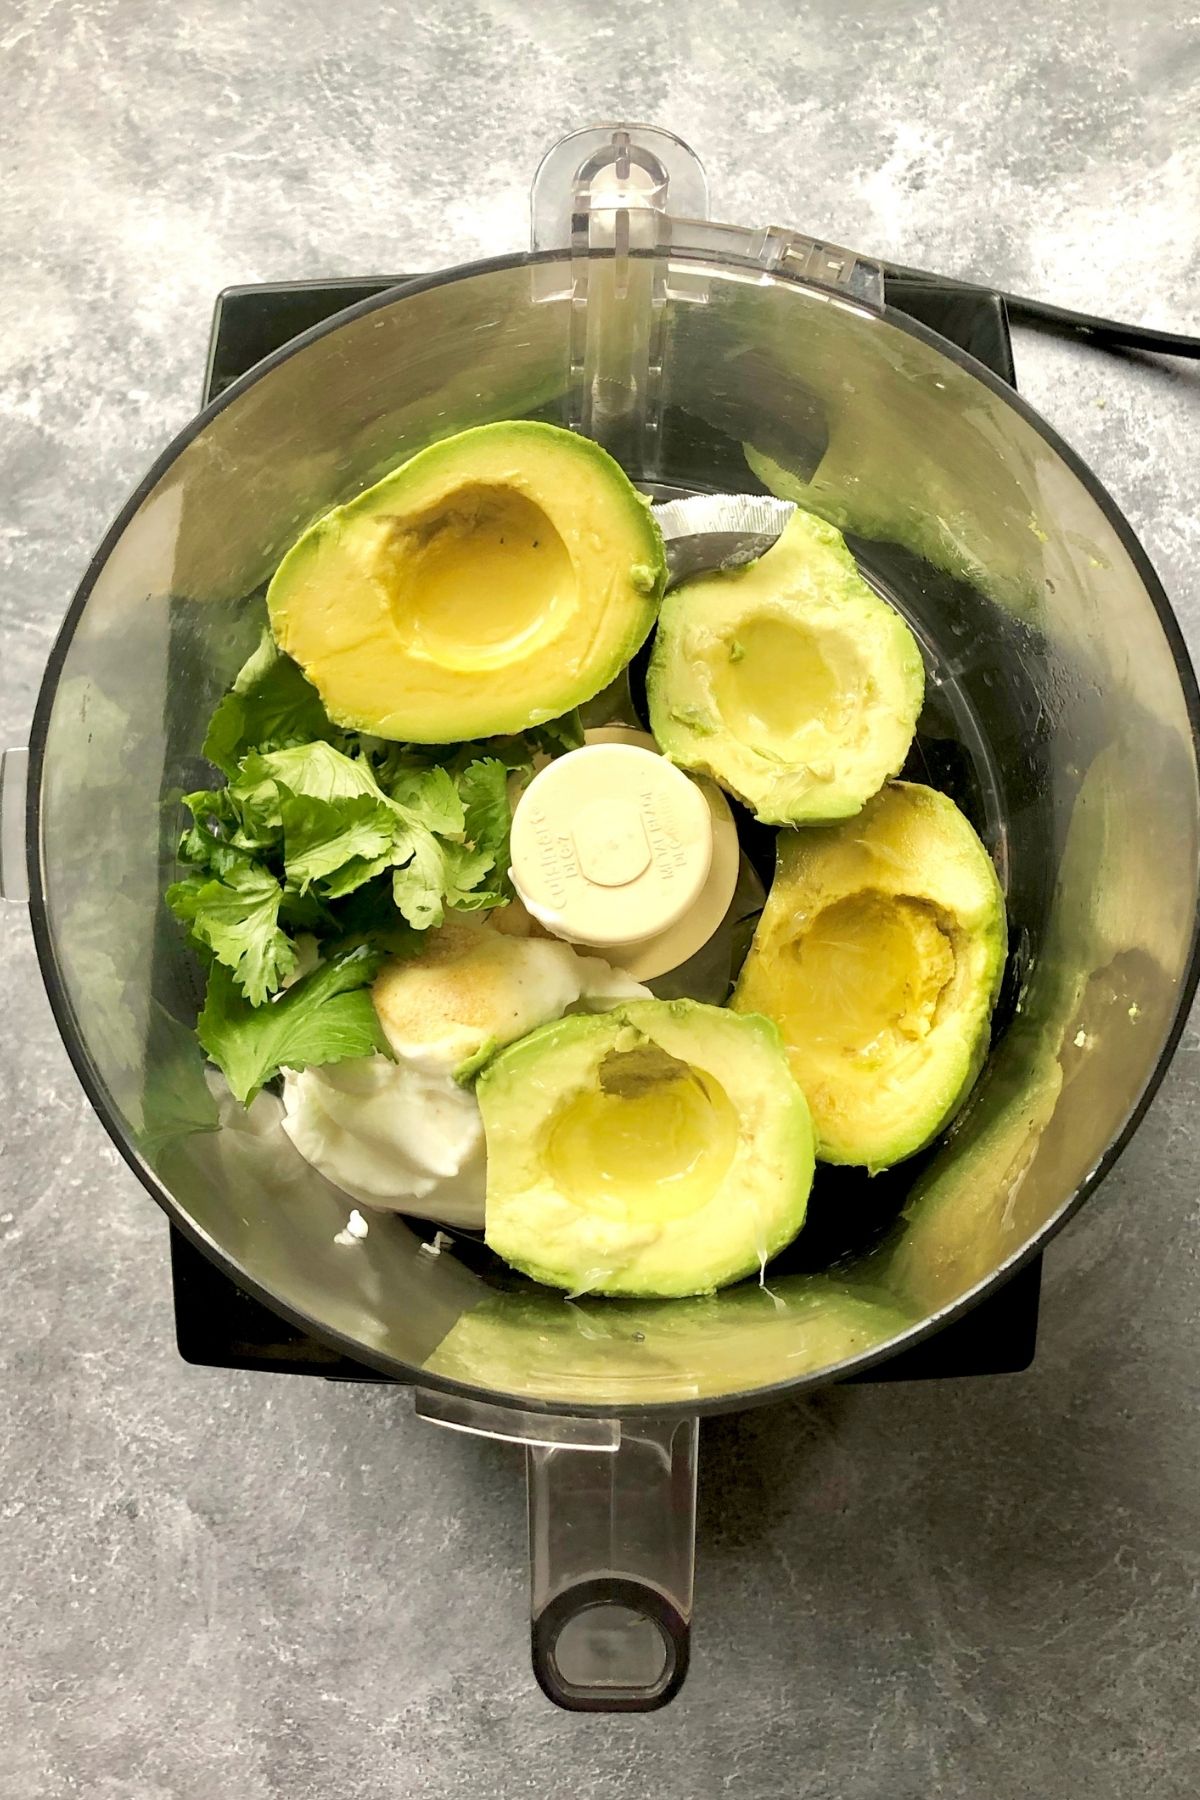 halved avocados, roughly chopped fresh cilantro, sour cream, lime juice, and garlic powder in the food processor